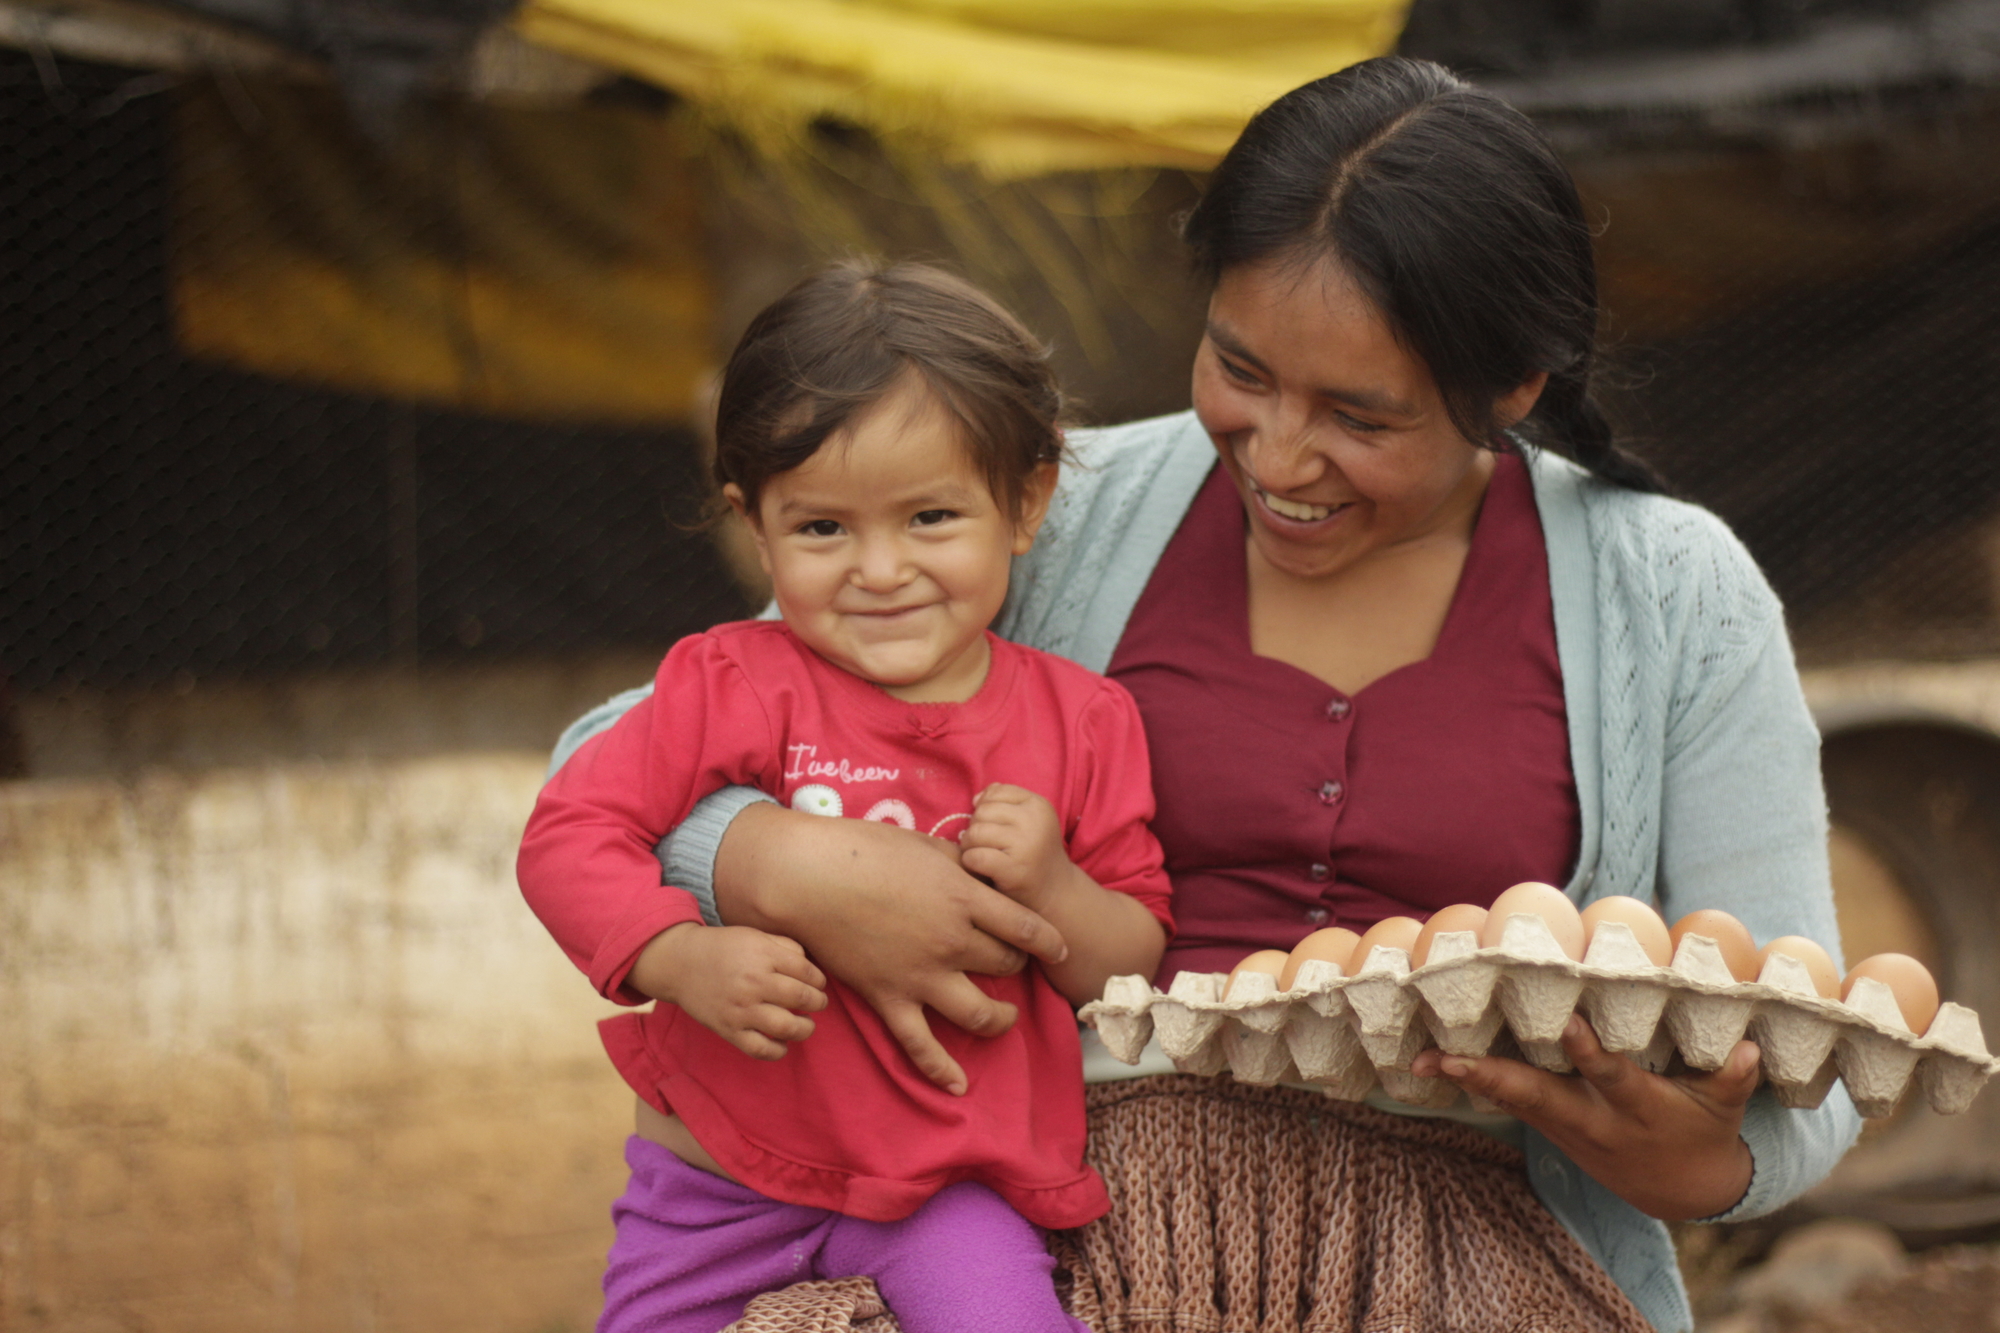 Nora with her youngest daughter shows the eggs she collects daily from her chicken pen in Bolivia. 